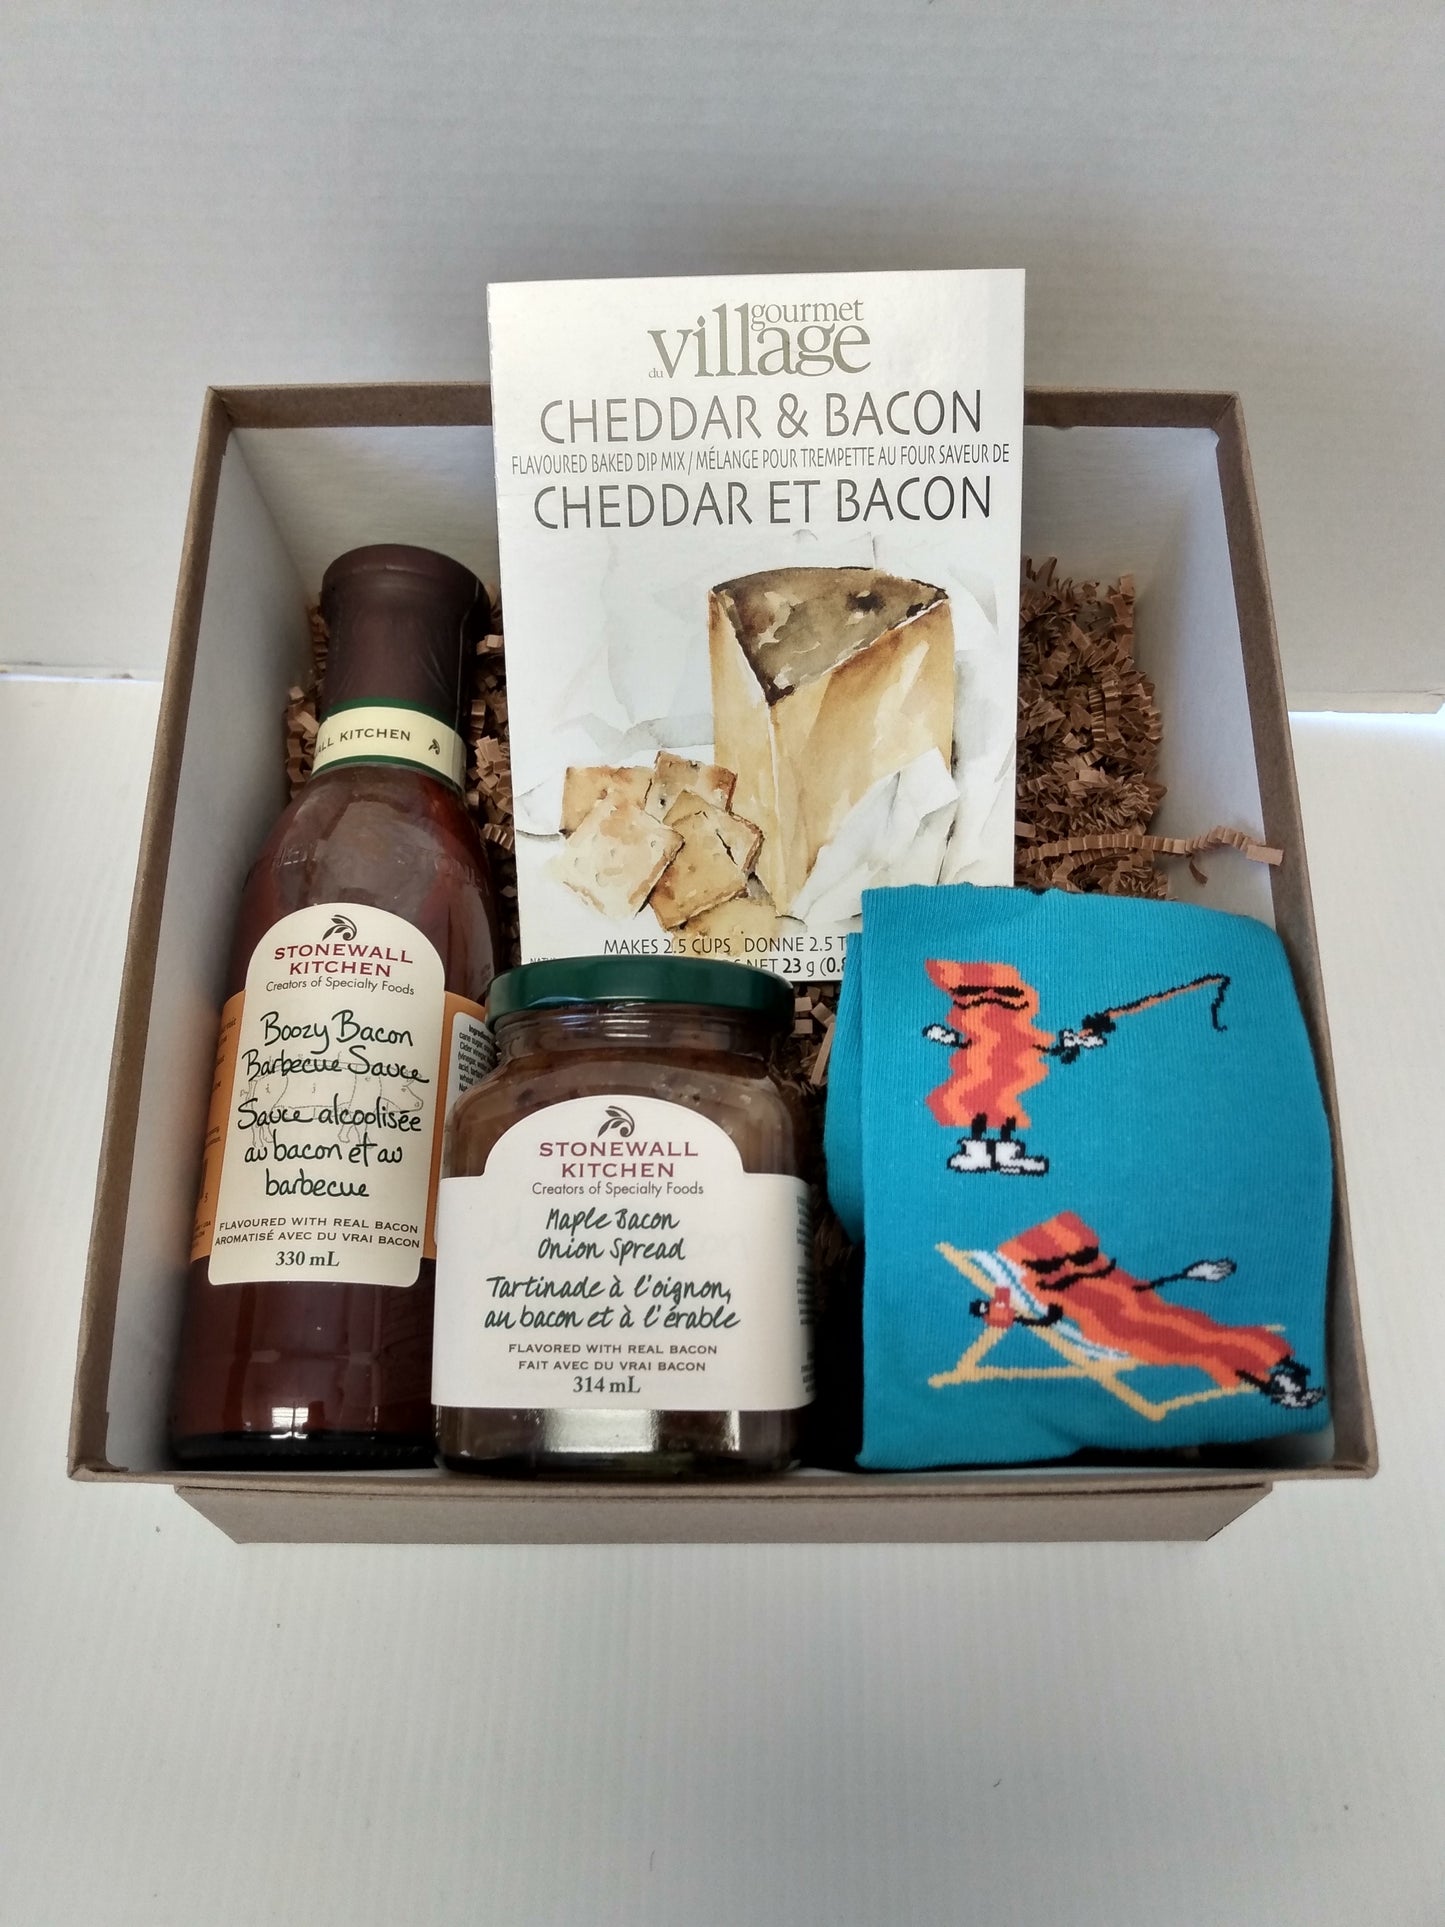 The Bacon Lovers Gift box